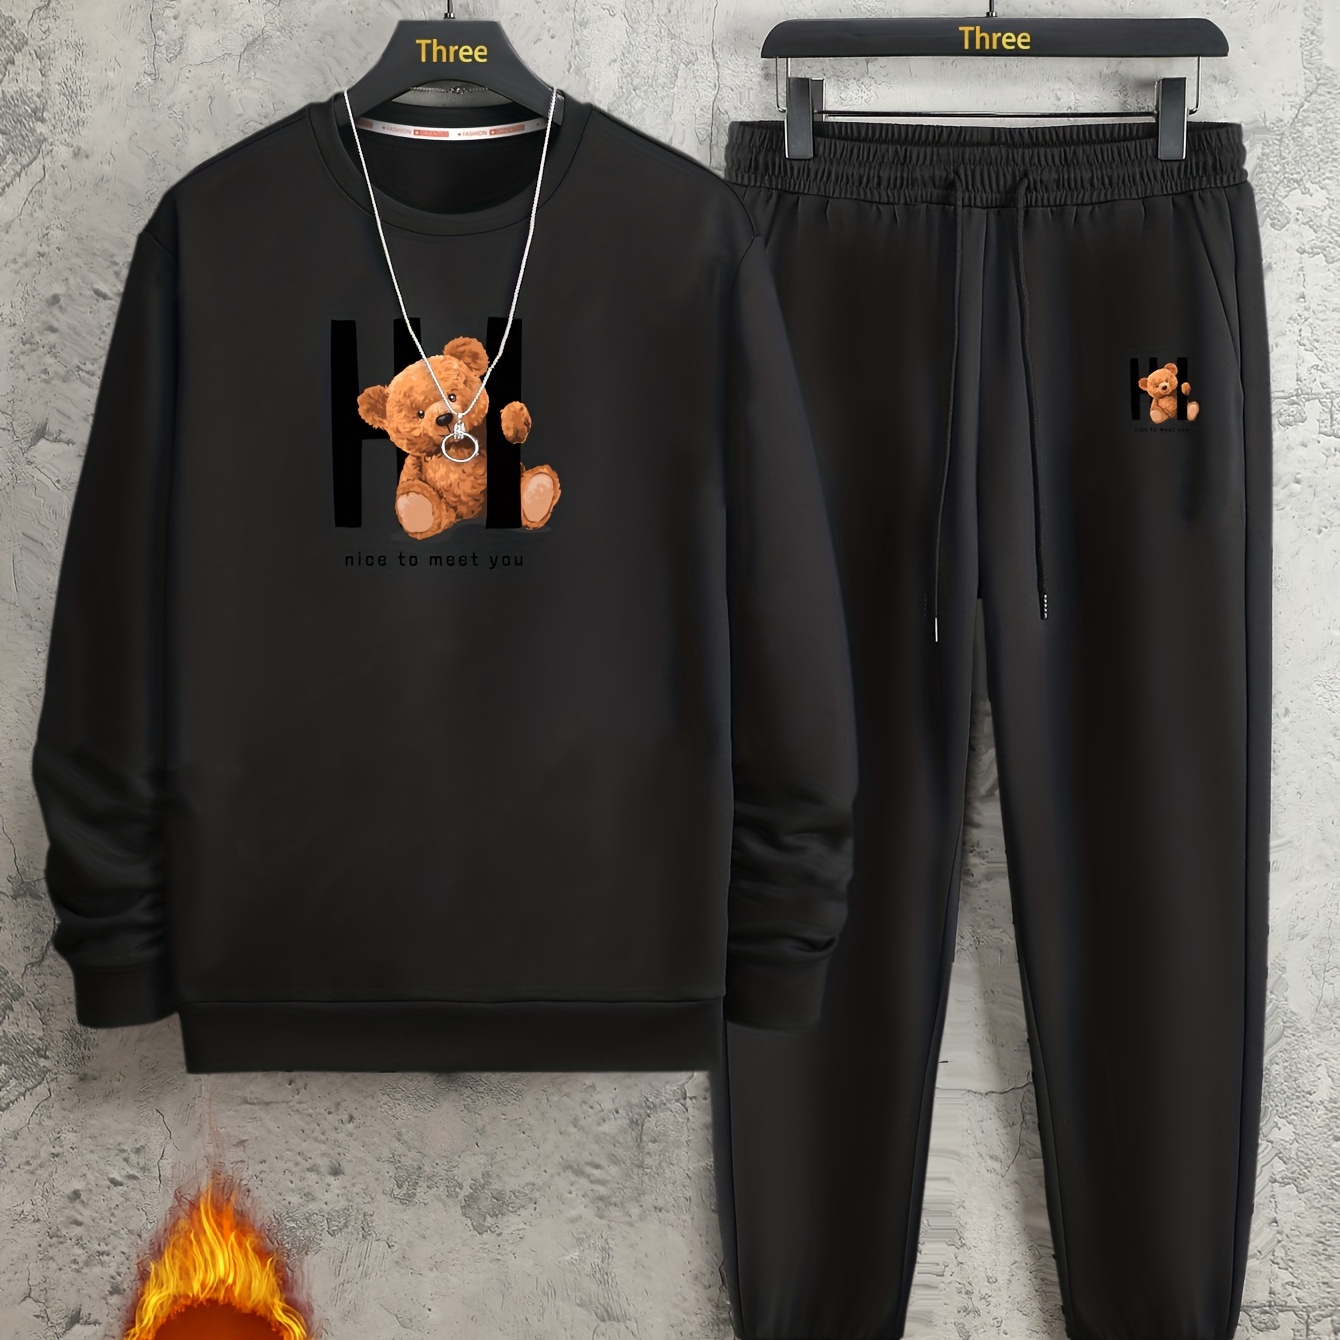 

Teddy Bear Print, Men's 2pcs Outfits, Casual Crew Neck Long Sleeve Pullover Sweatshirt And Drawstring Sweatpants Joggers Set For Spring Fall, Men's Clothing